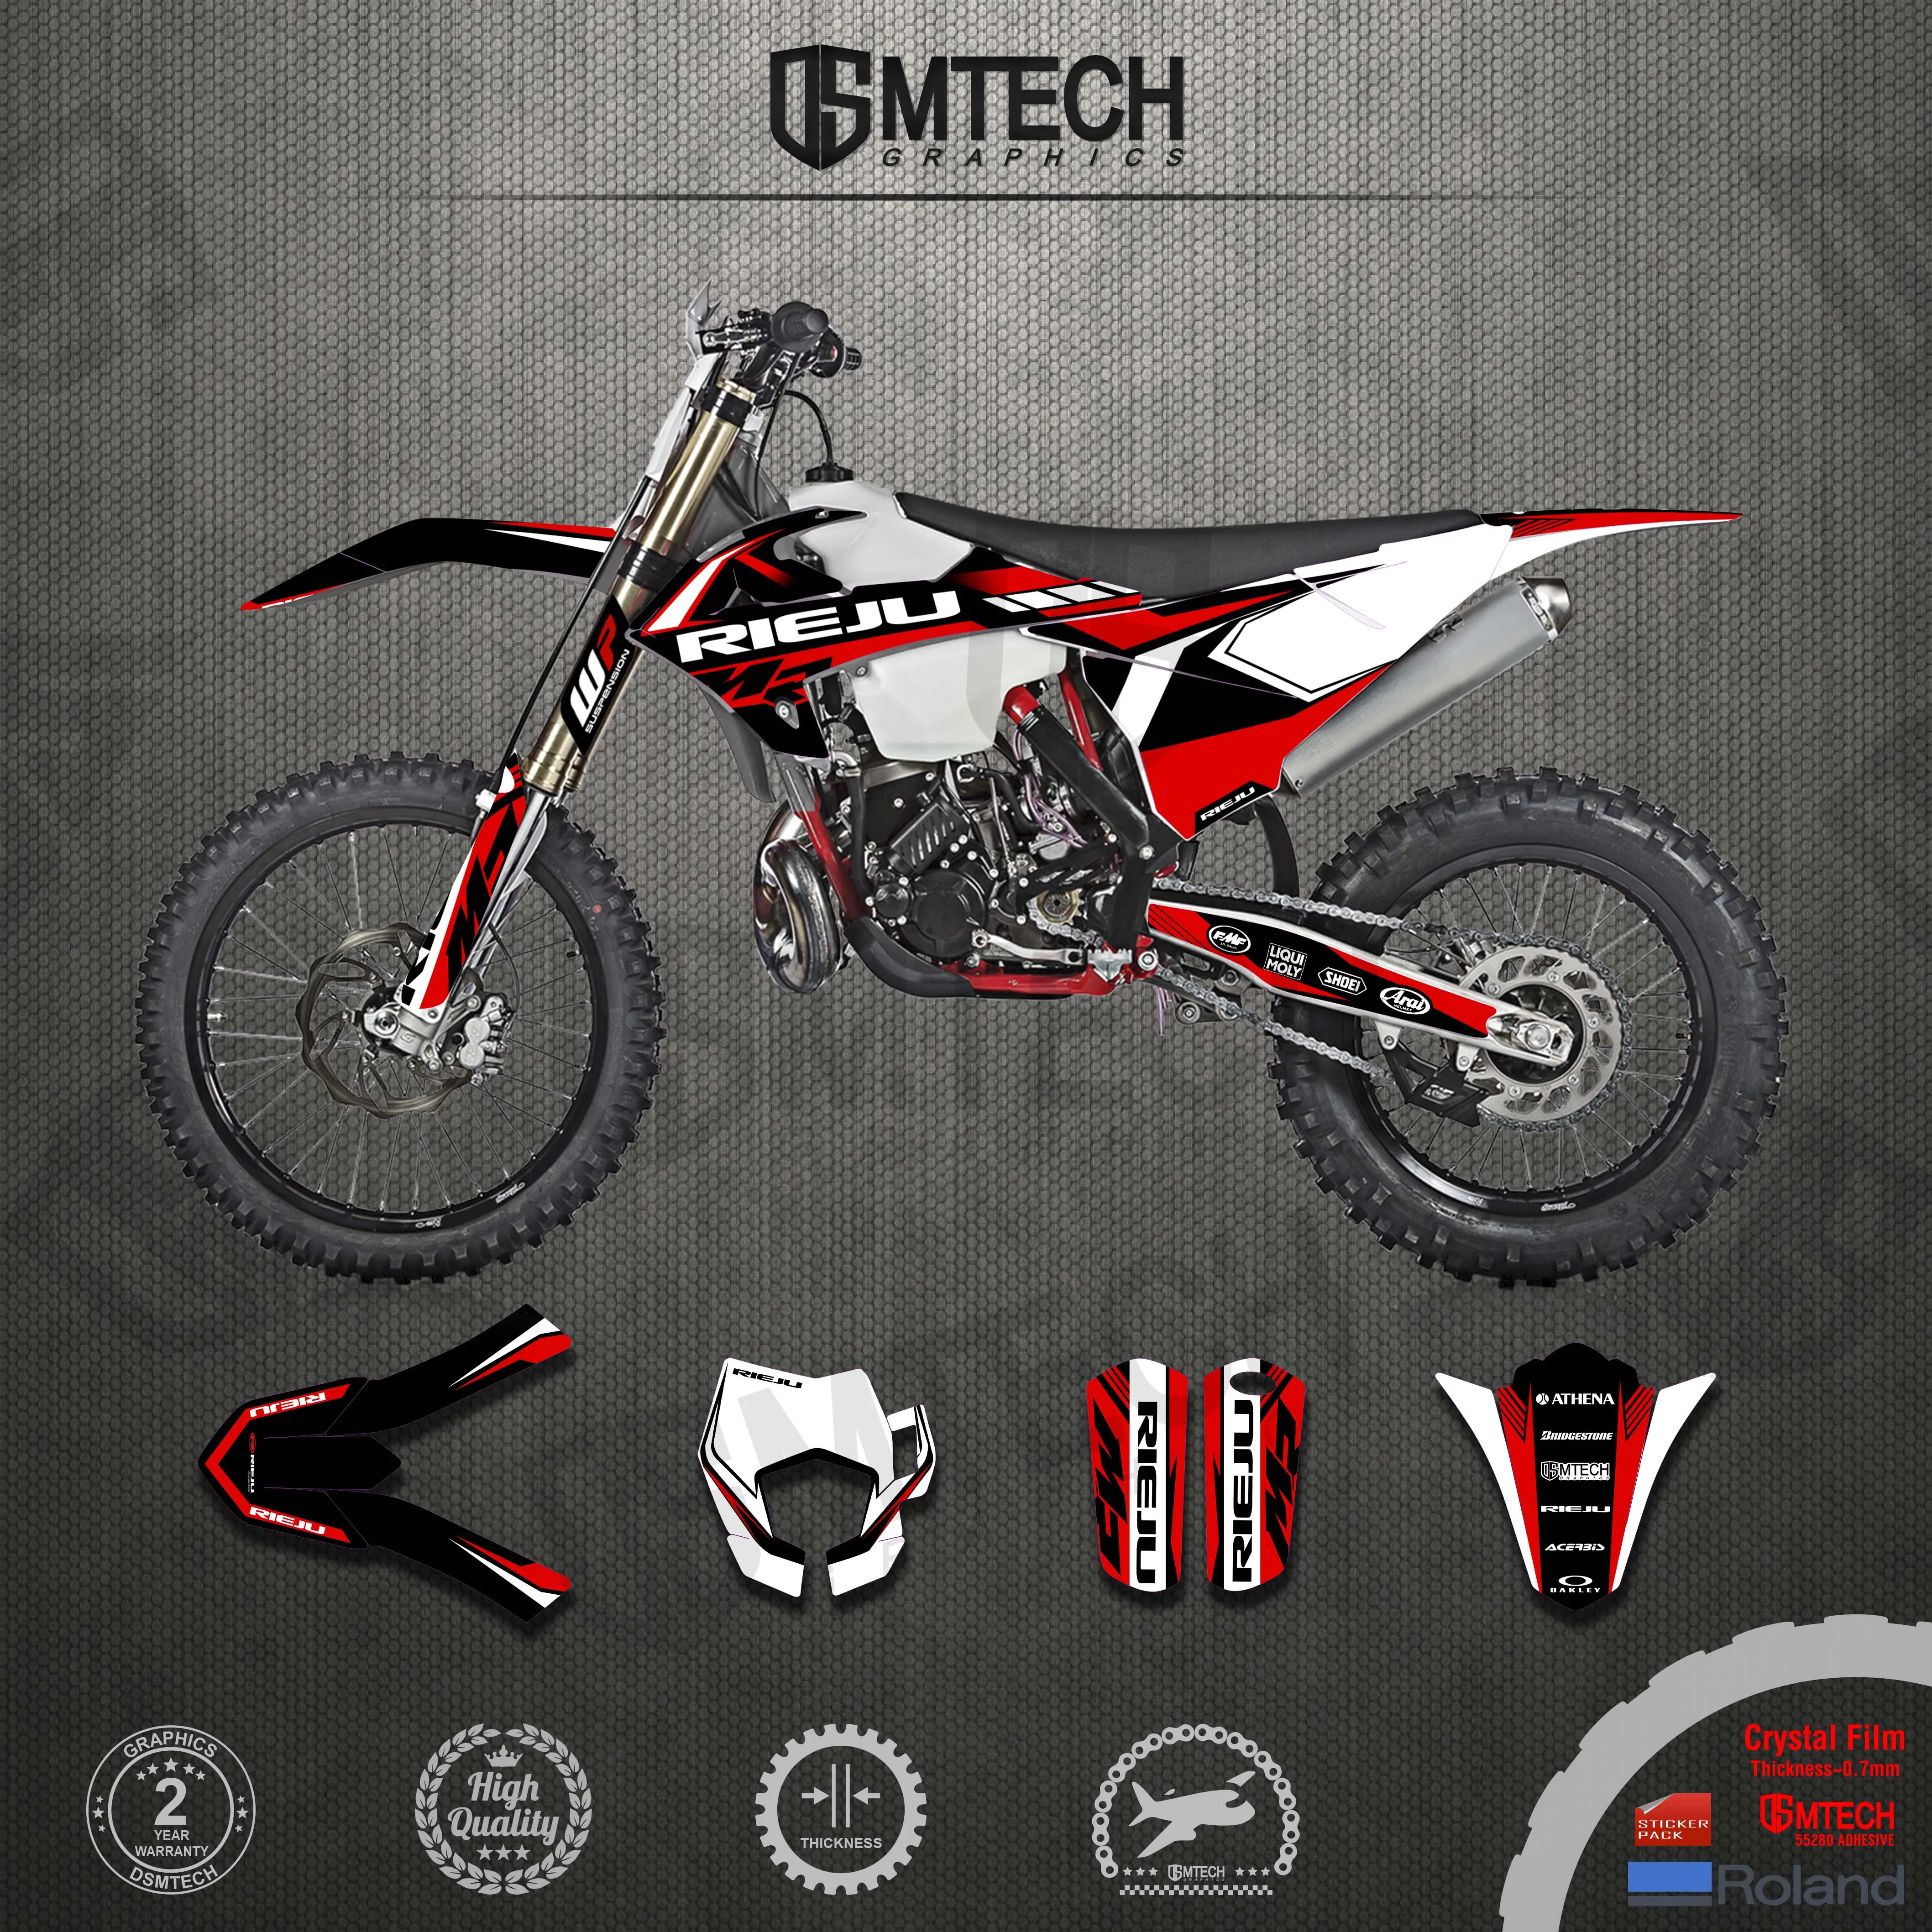 DSMTECH Motorcycle for Custom Team Graphics Backgrounds Decals Stickers Kit For Rieju MR MR Pro300 2020 2021 Decals Stickers Kit